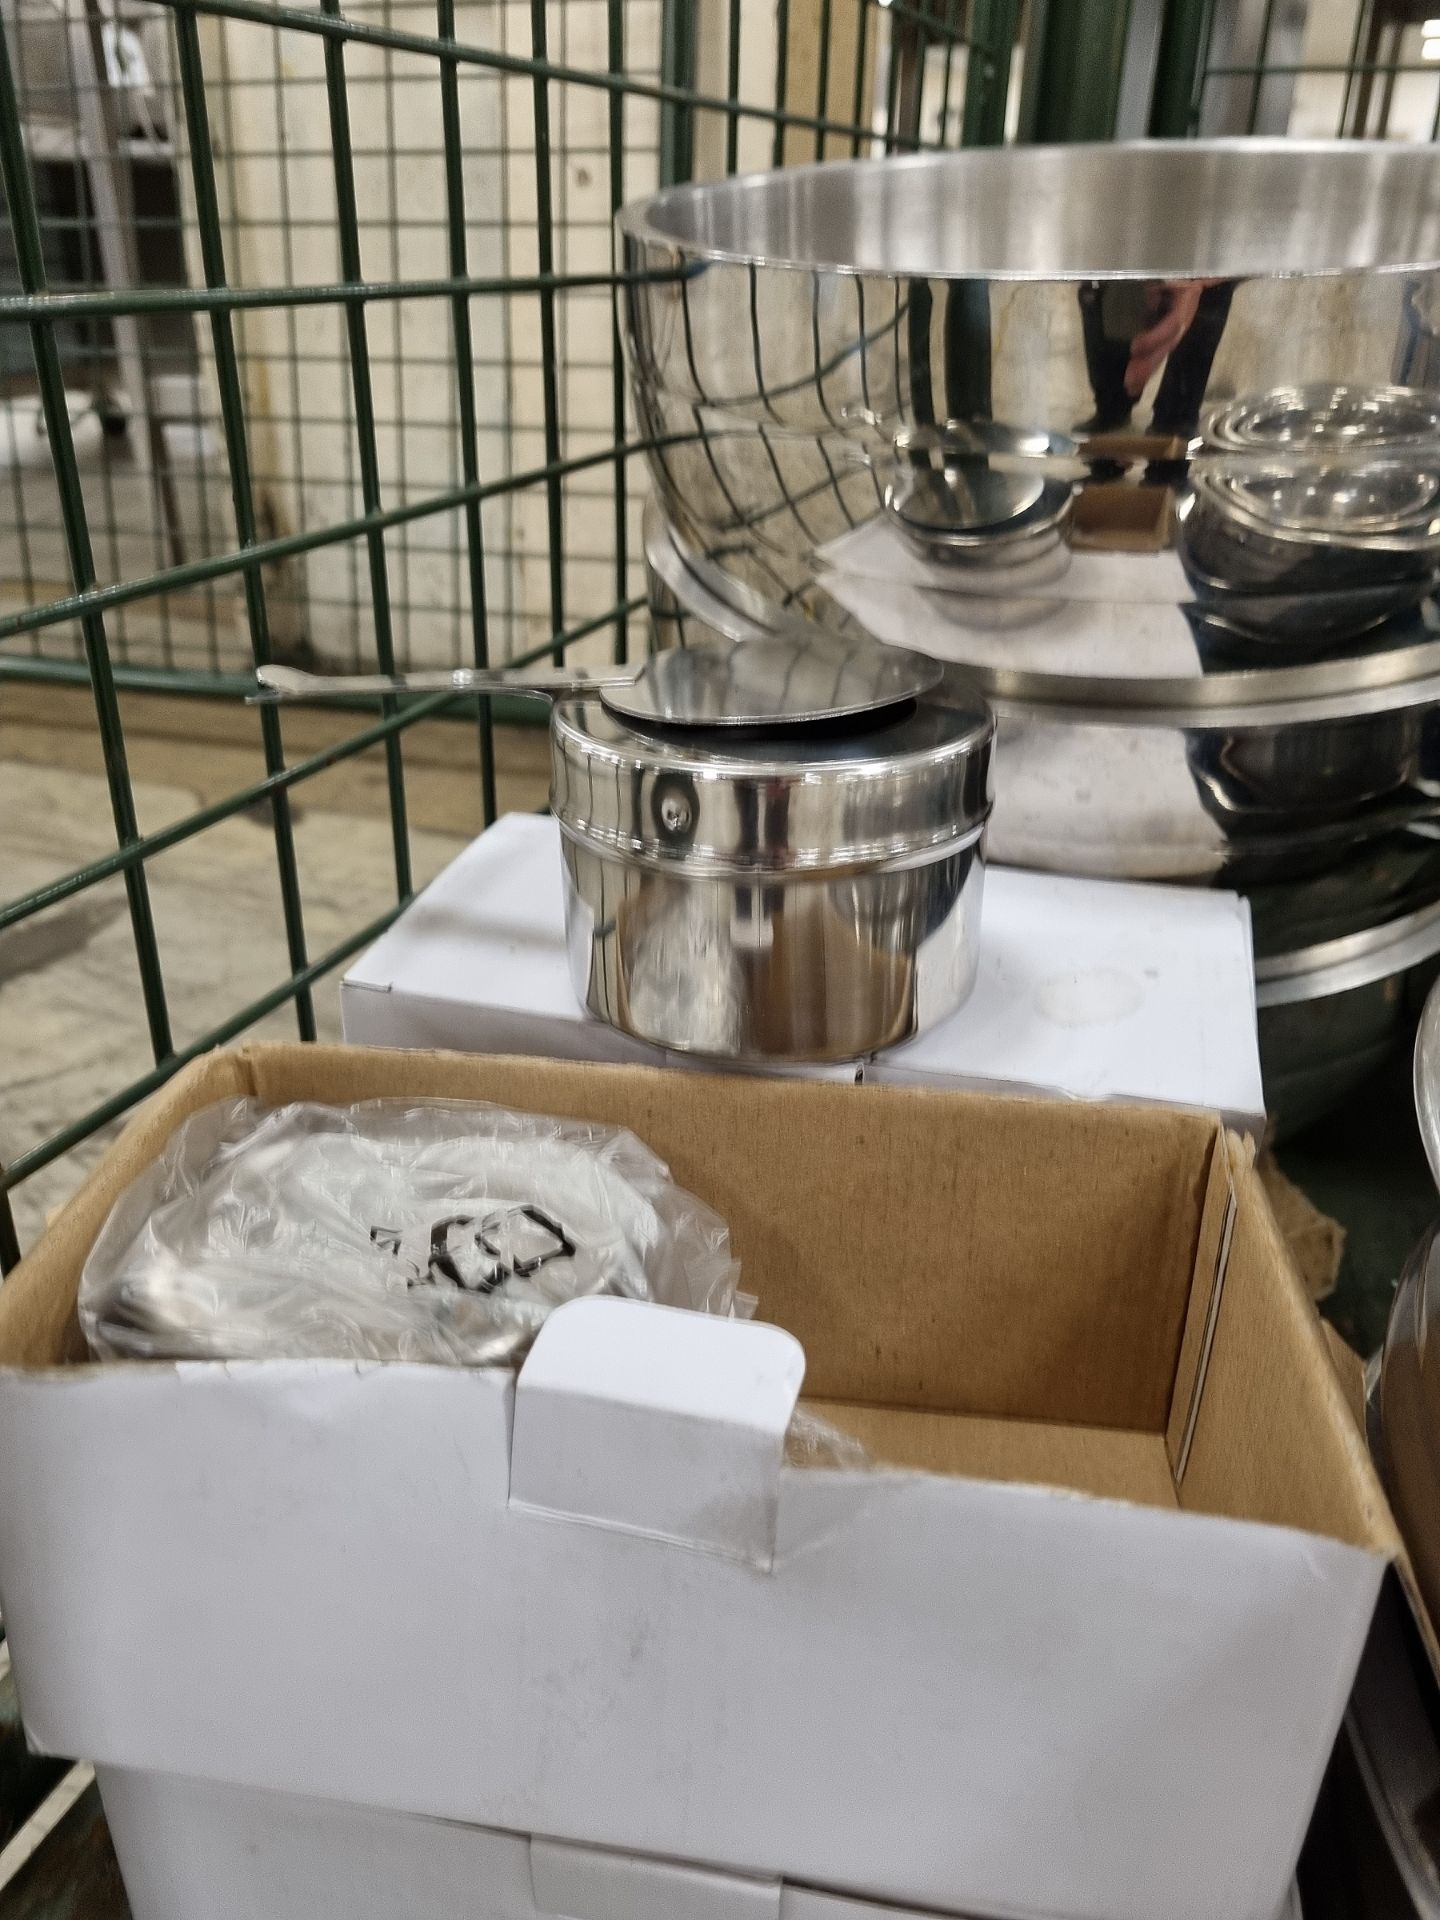 Catering equipment and supplies consisting of stainless steel pots, pans, bowls, containers - Image 3 of 6